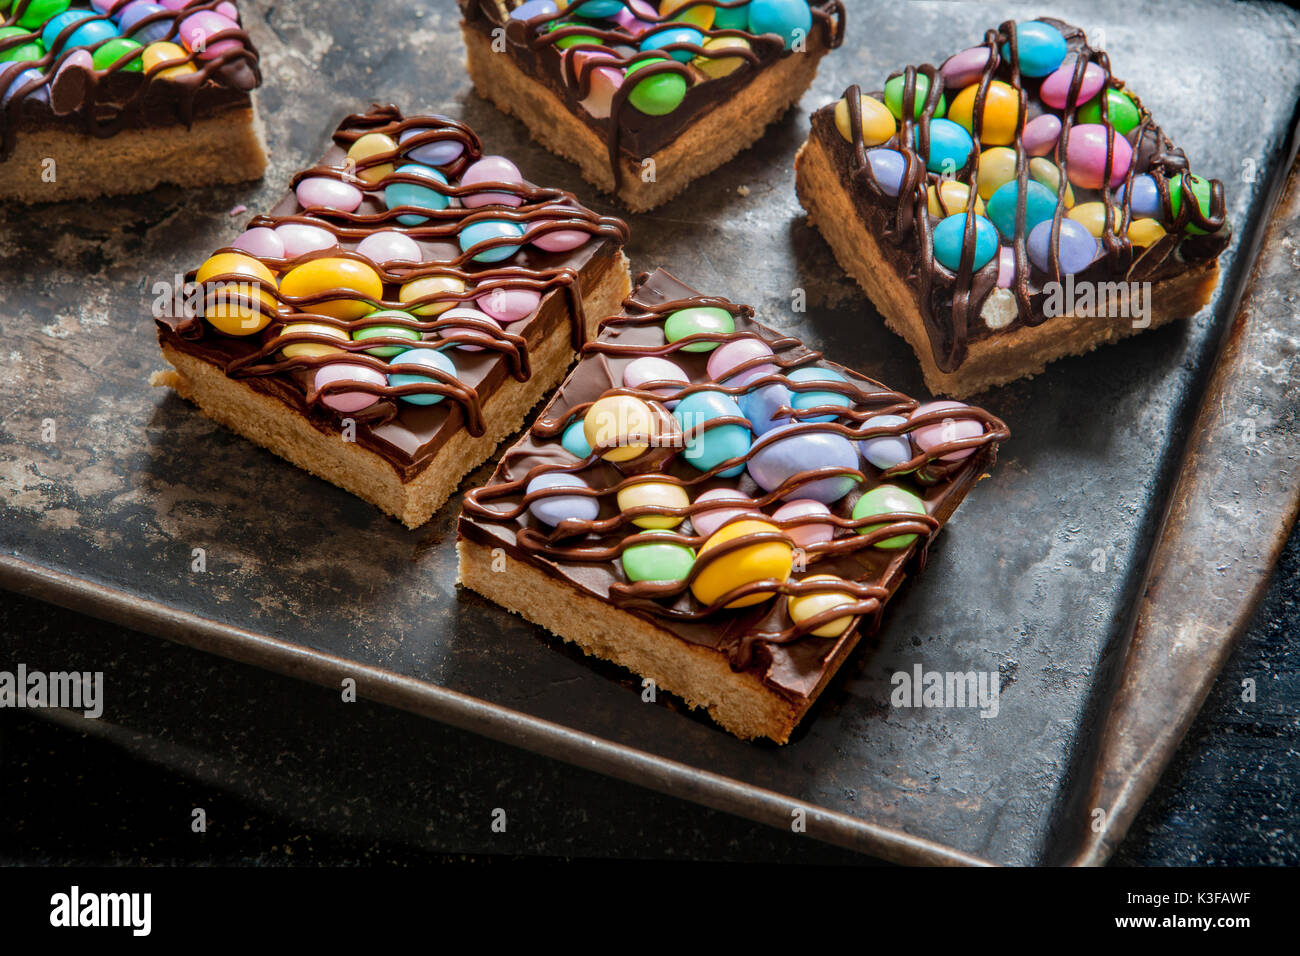 Two Colorful Shortbread Candy Bars Drizzled with Chocolate on Baking Sheet Stock Photo